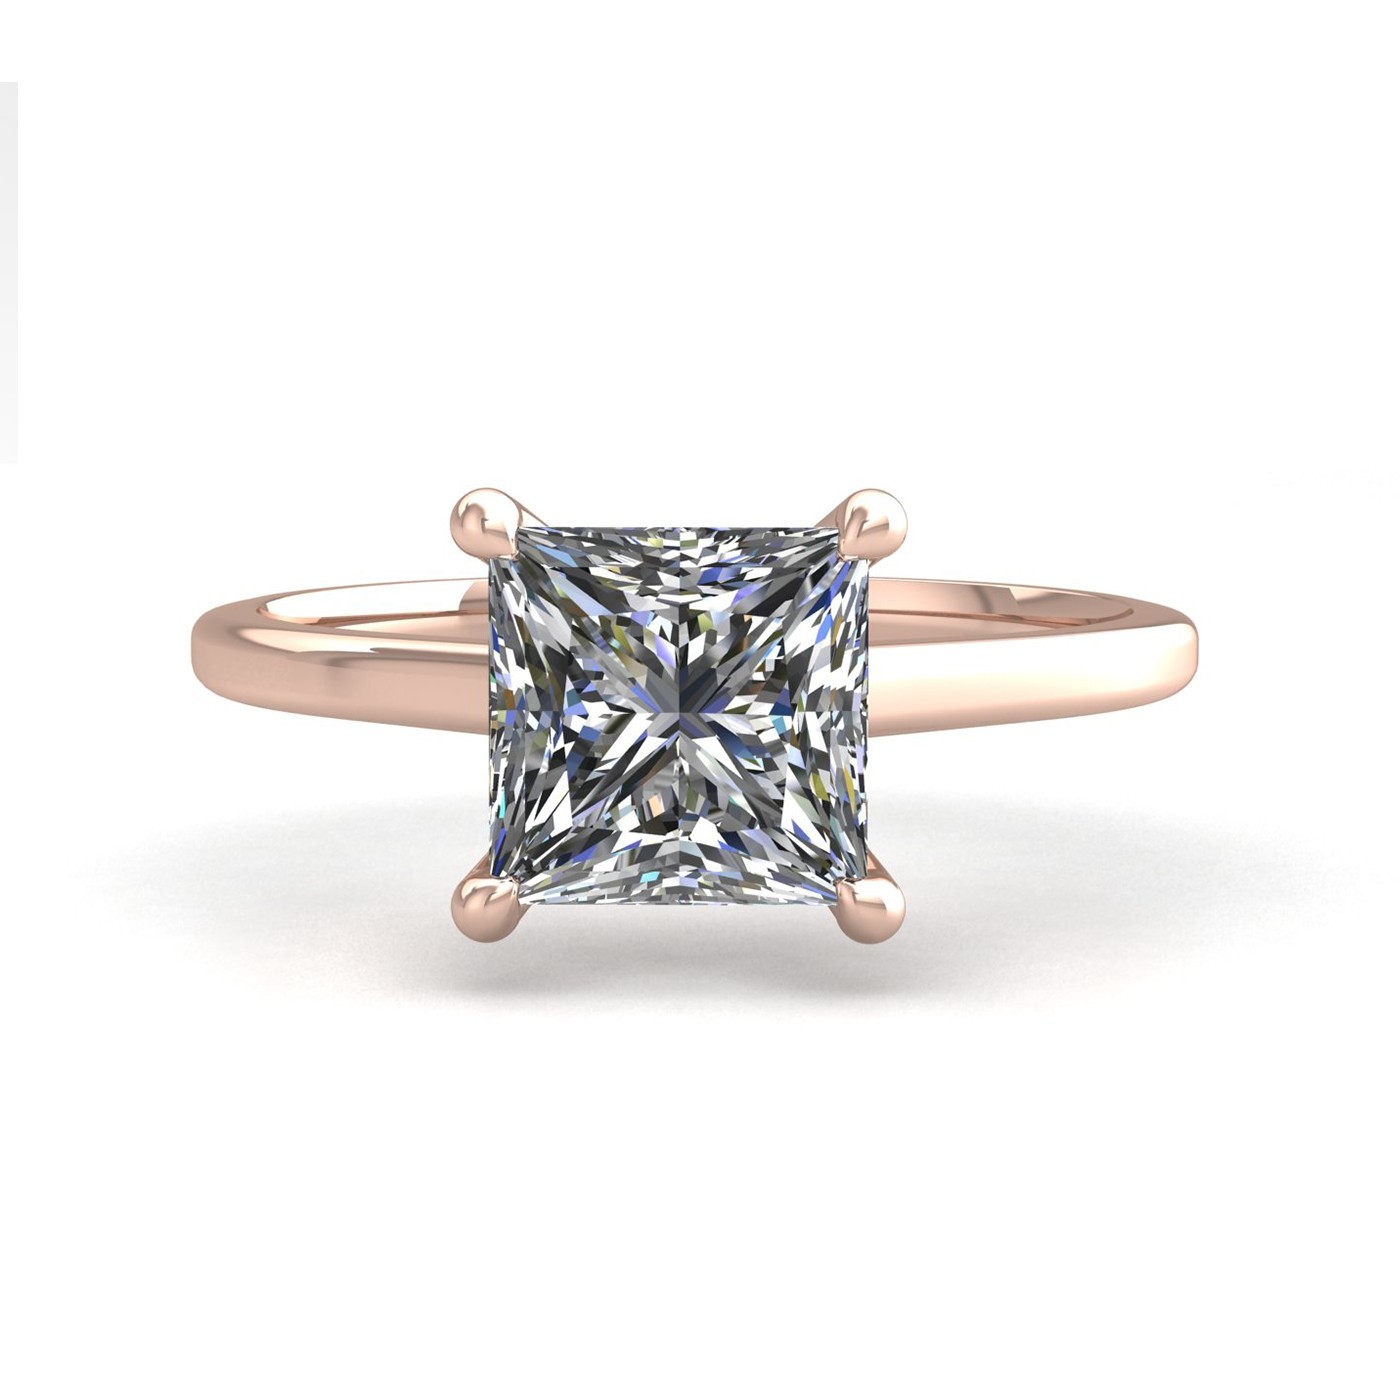 18k rose gold  2,50 ct 4 prongs solitaire princess cut diamond engagement ring with whisper thin band Photos & images